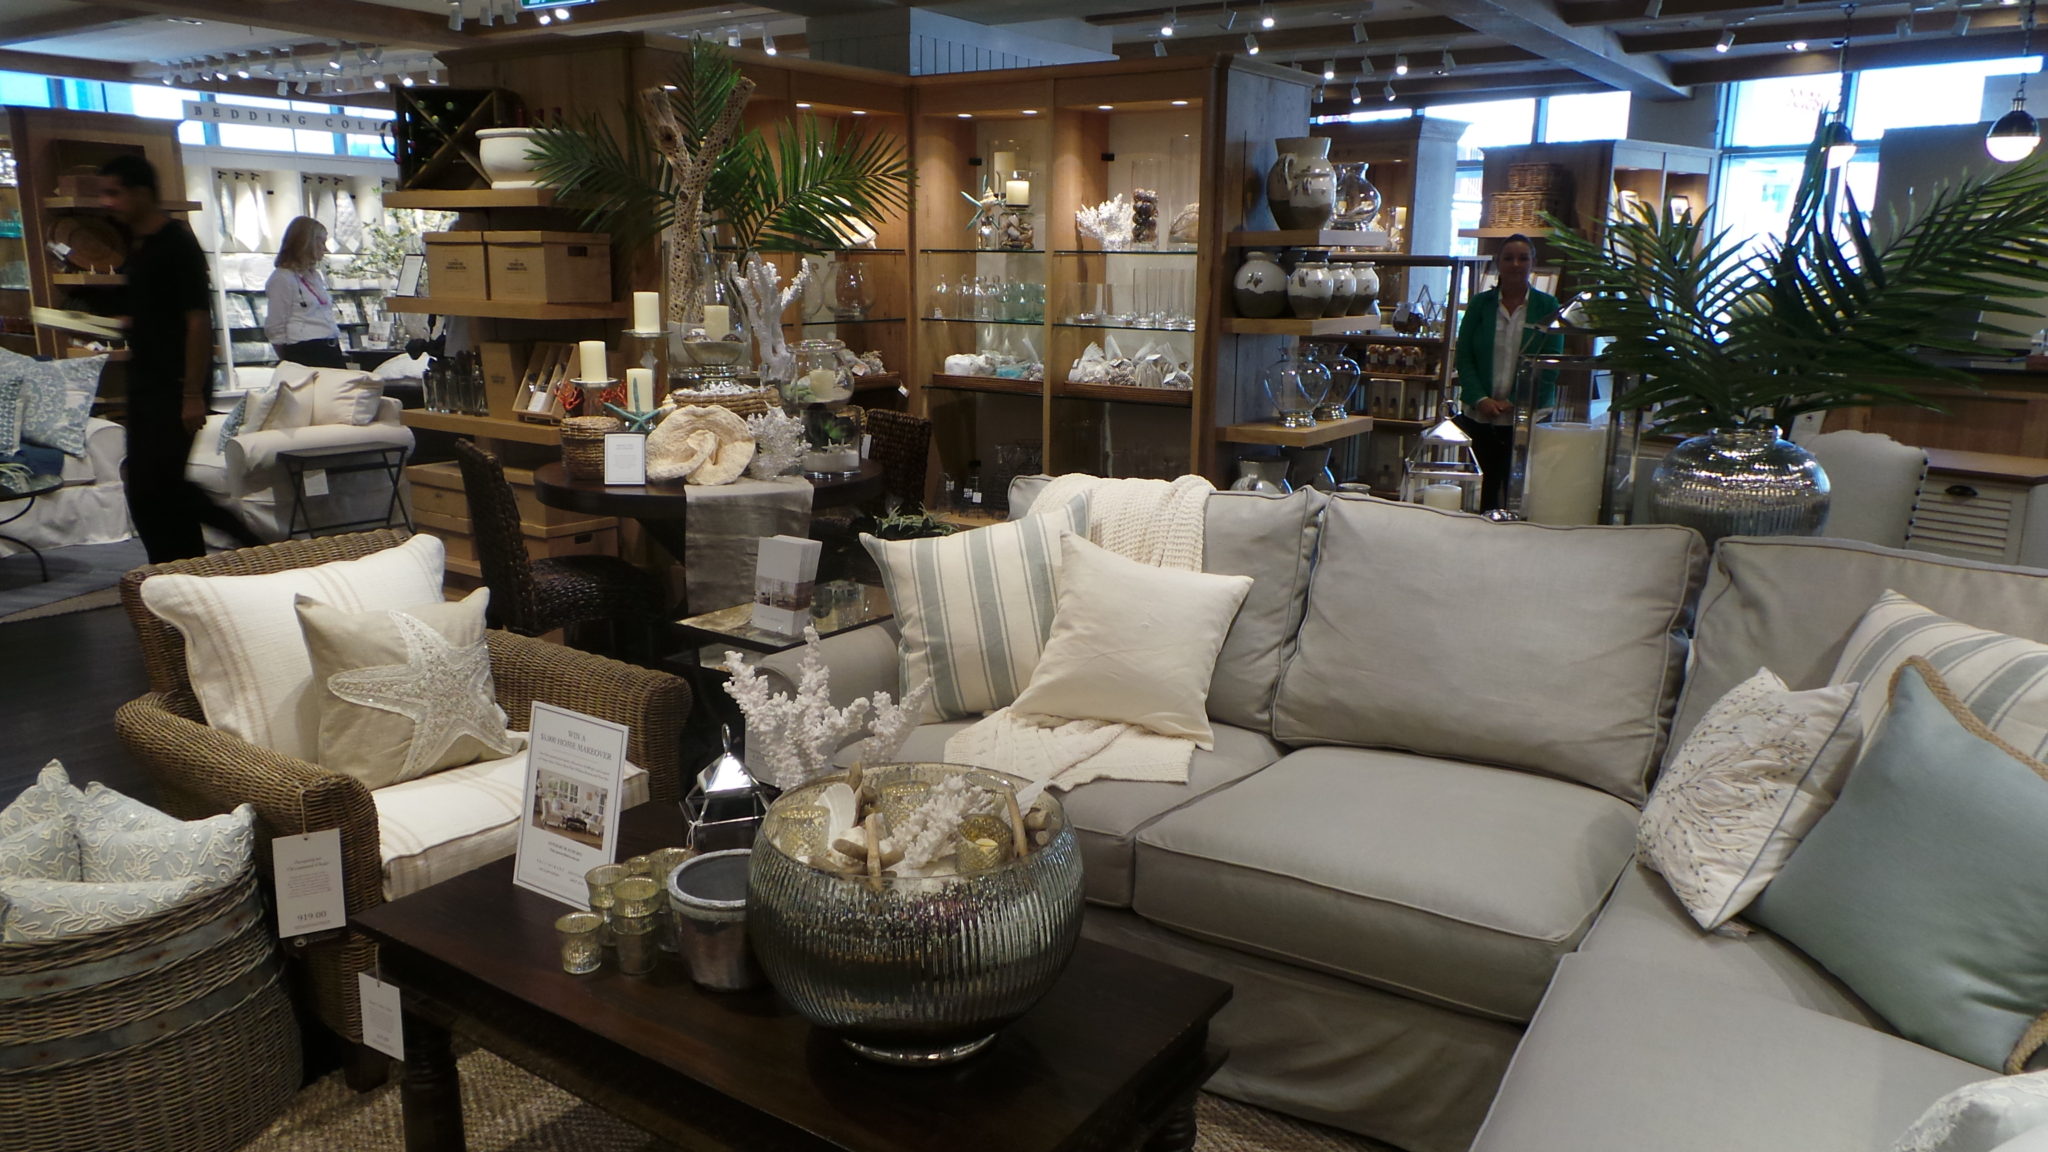 The Day I D Been Waiting For The Pottery Barn West Elm And Williams Sonoma Preview The Interiors Addict